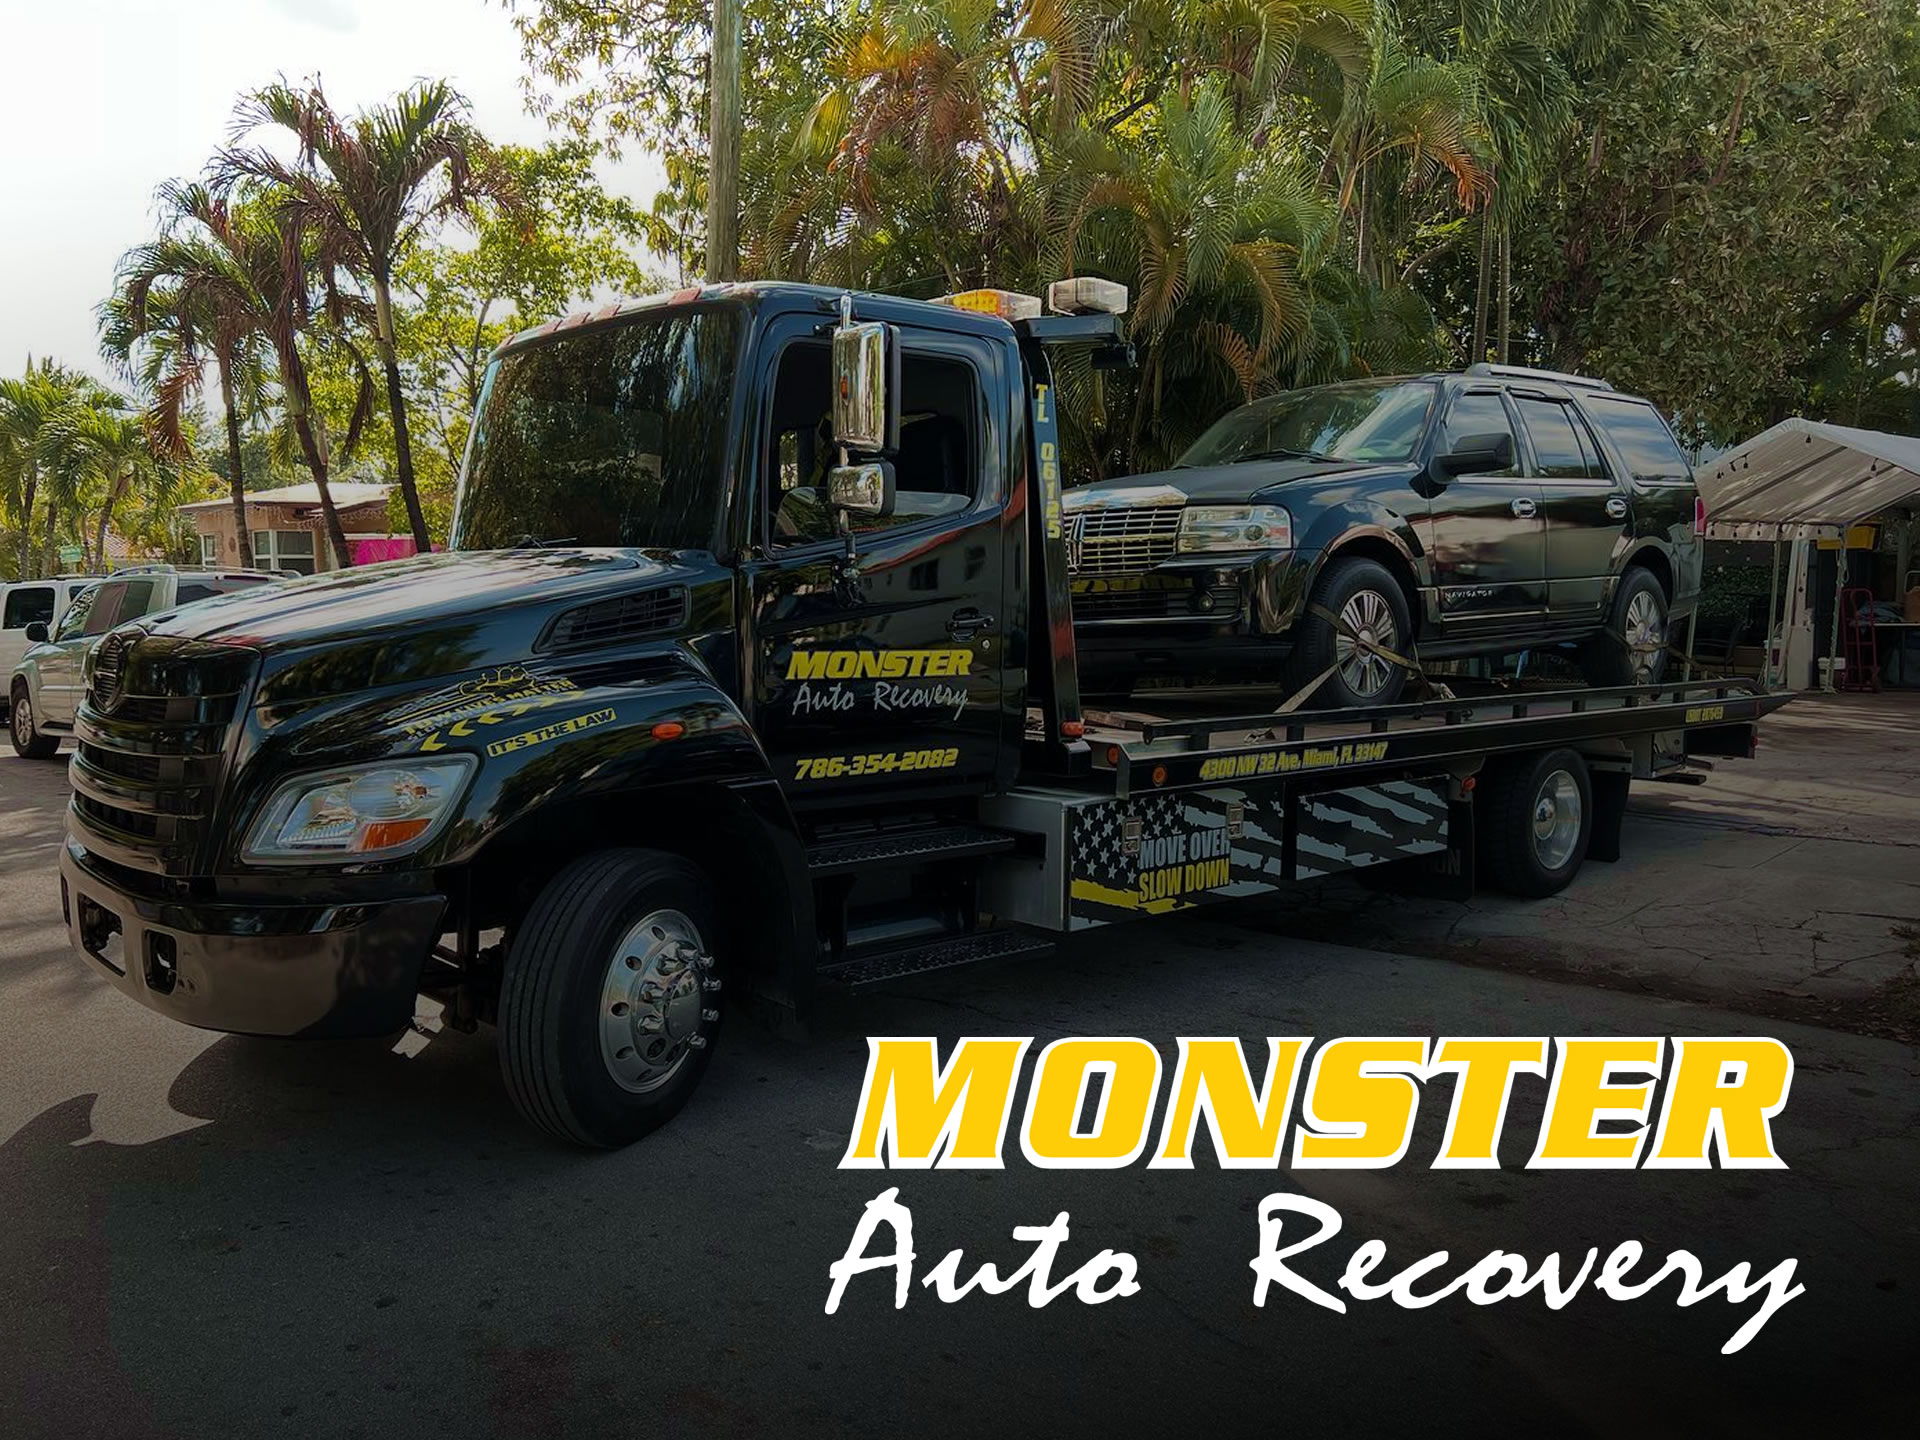 Reliable and affordable tow truck services in all of Miami-Dade & Broward Counties. Tow truck service areas include: Miami, Hialeah, Downtown Miami, Brickell, Coral Gables, Doral, Kendall, Miami Beach, North Bay Village, North Miami, Miami Gardens, West Park & more…